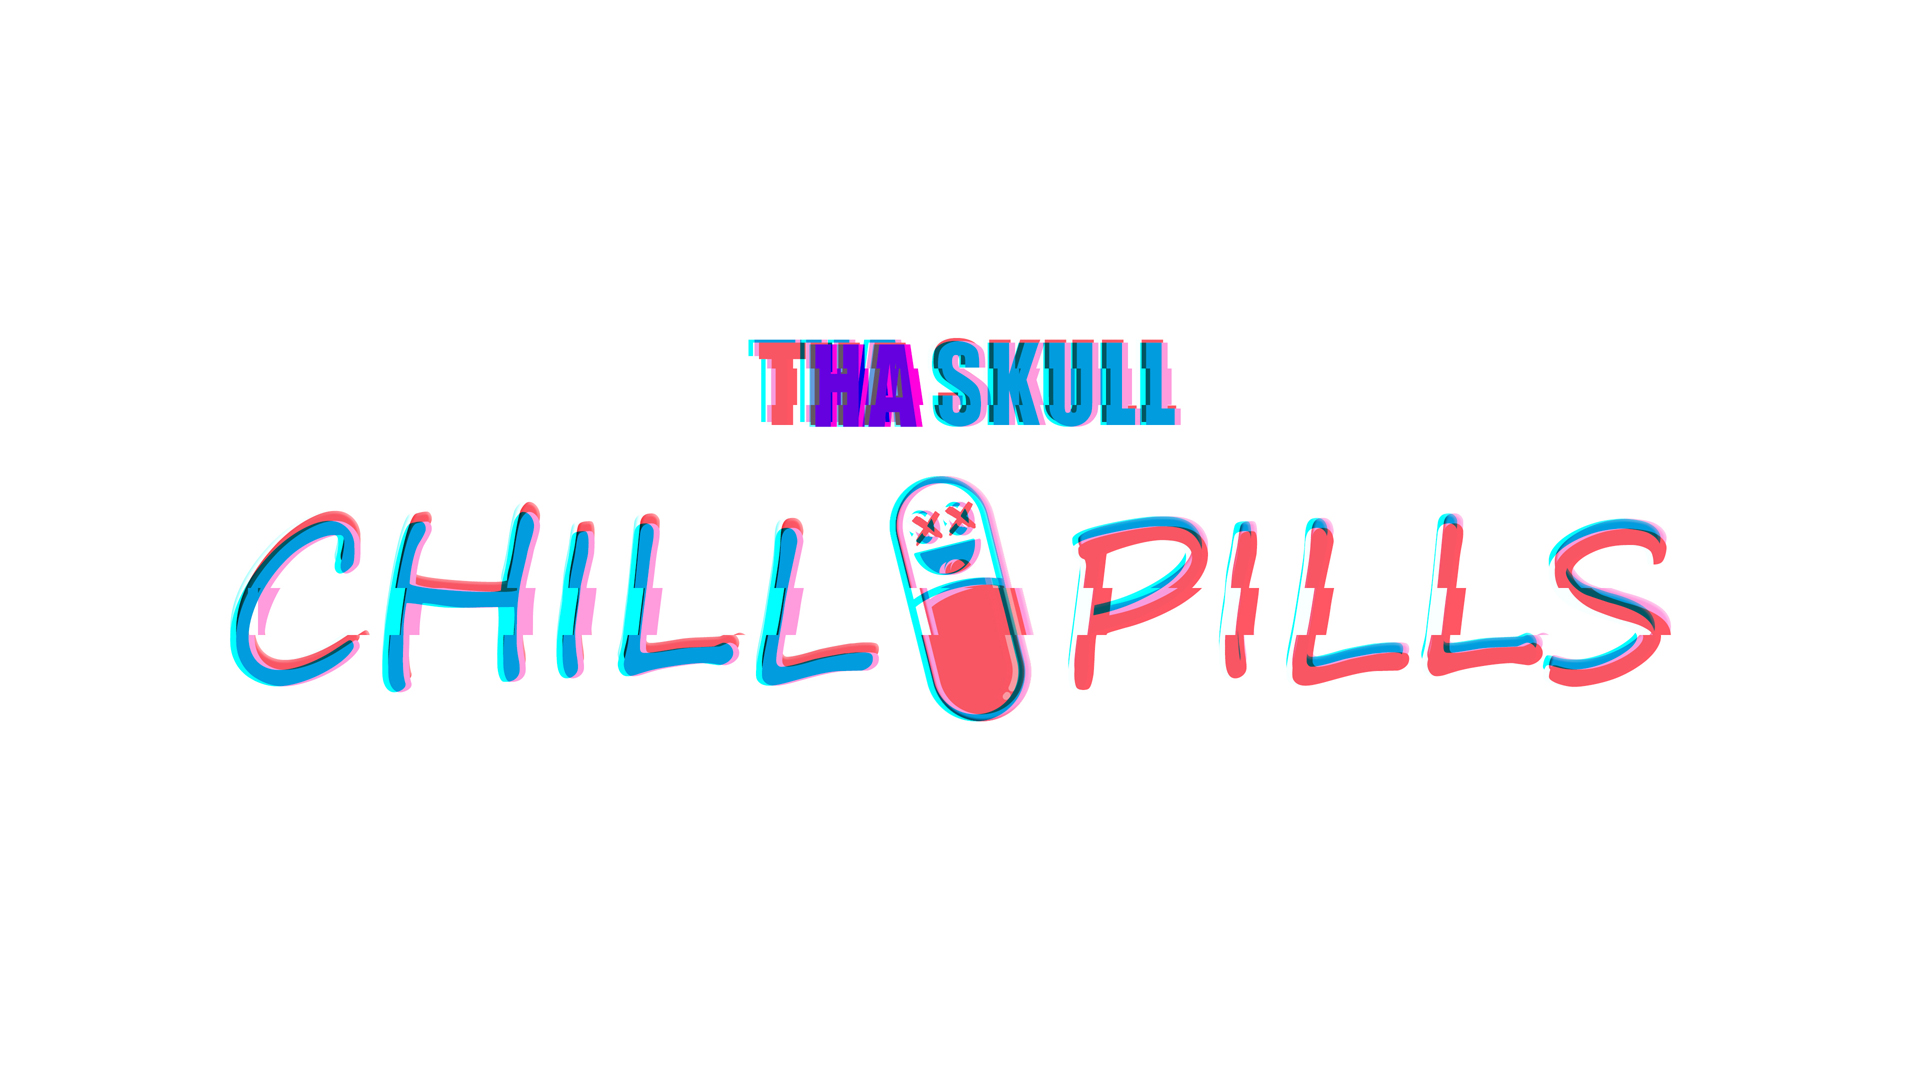 General 1920x1080 music Chill Out pills